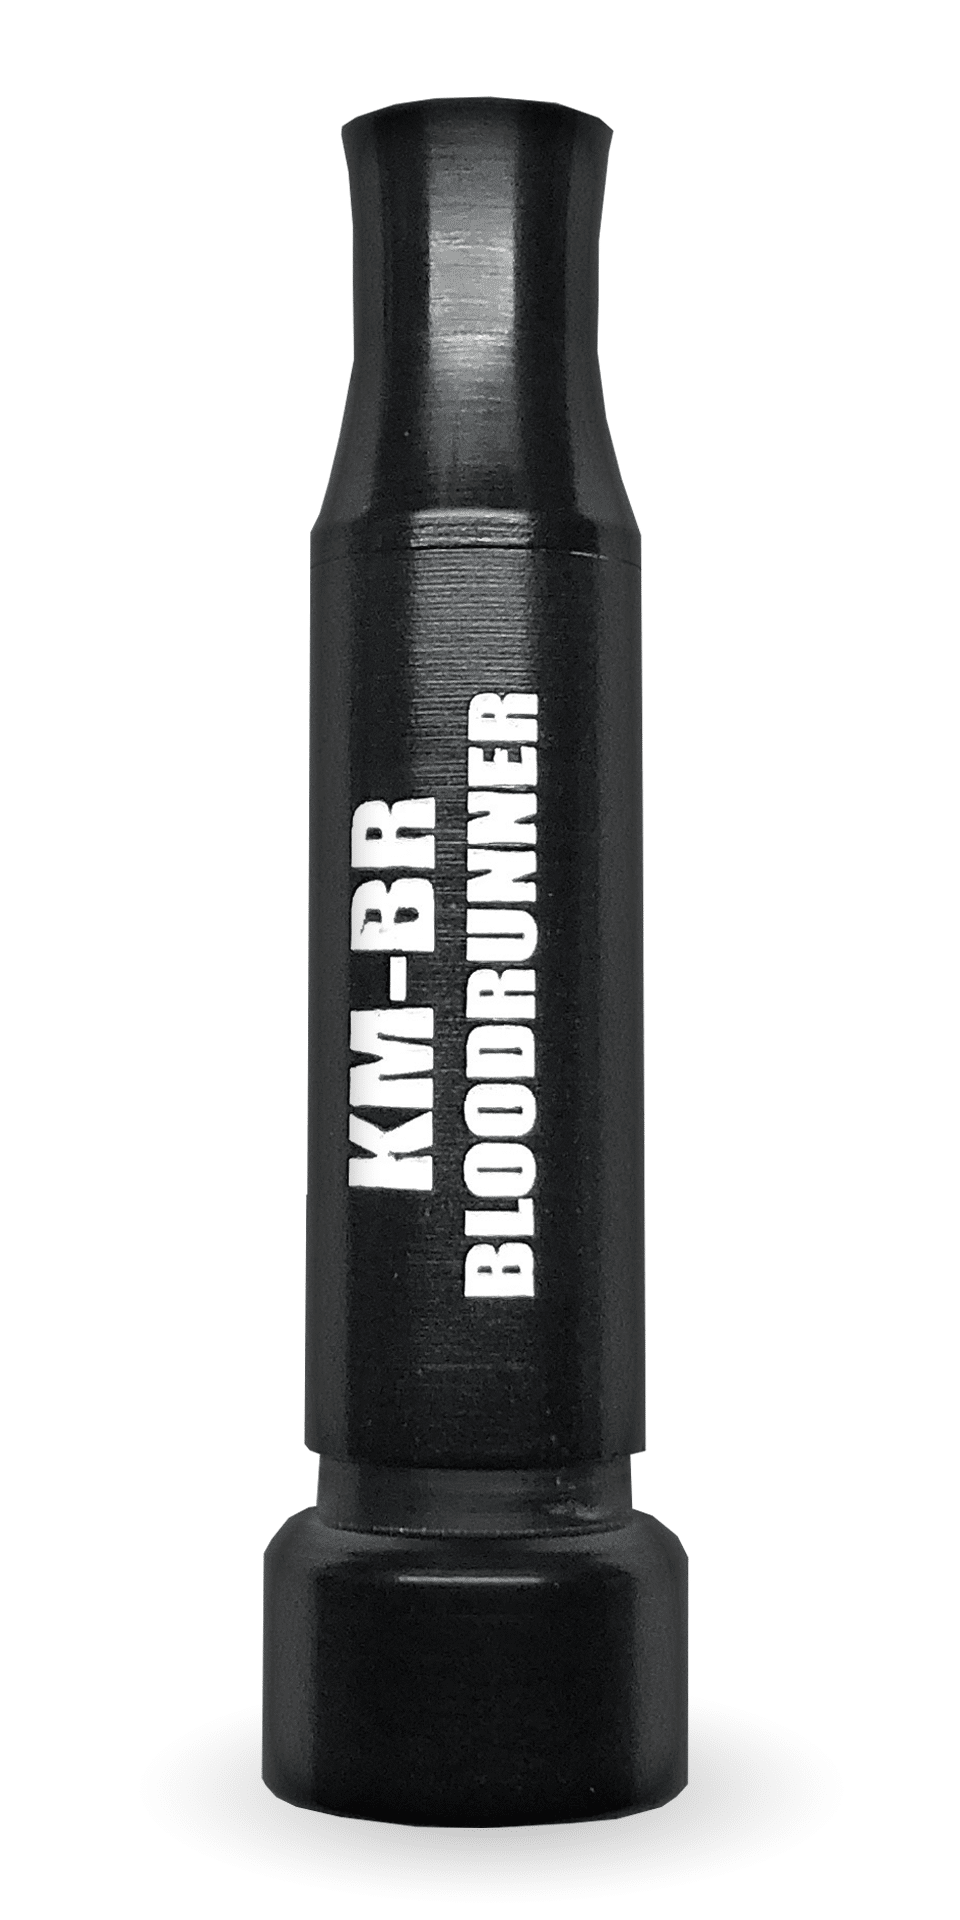 KM-BR Bloodrunner Cut-Down Duck Call Black with White Lettering mallard duck call by Kirk McCullough